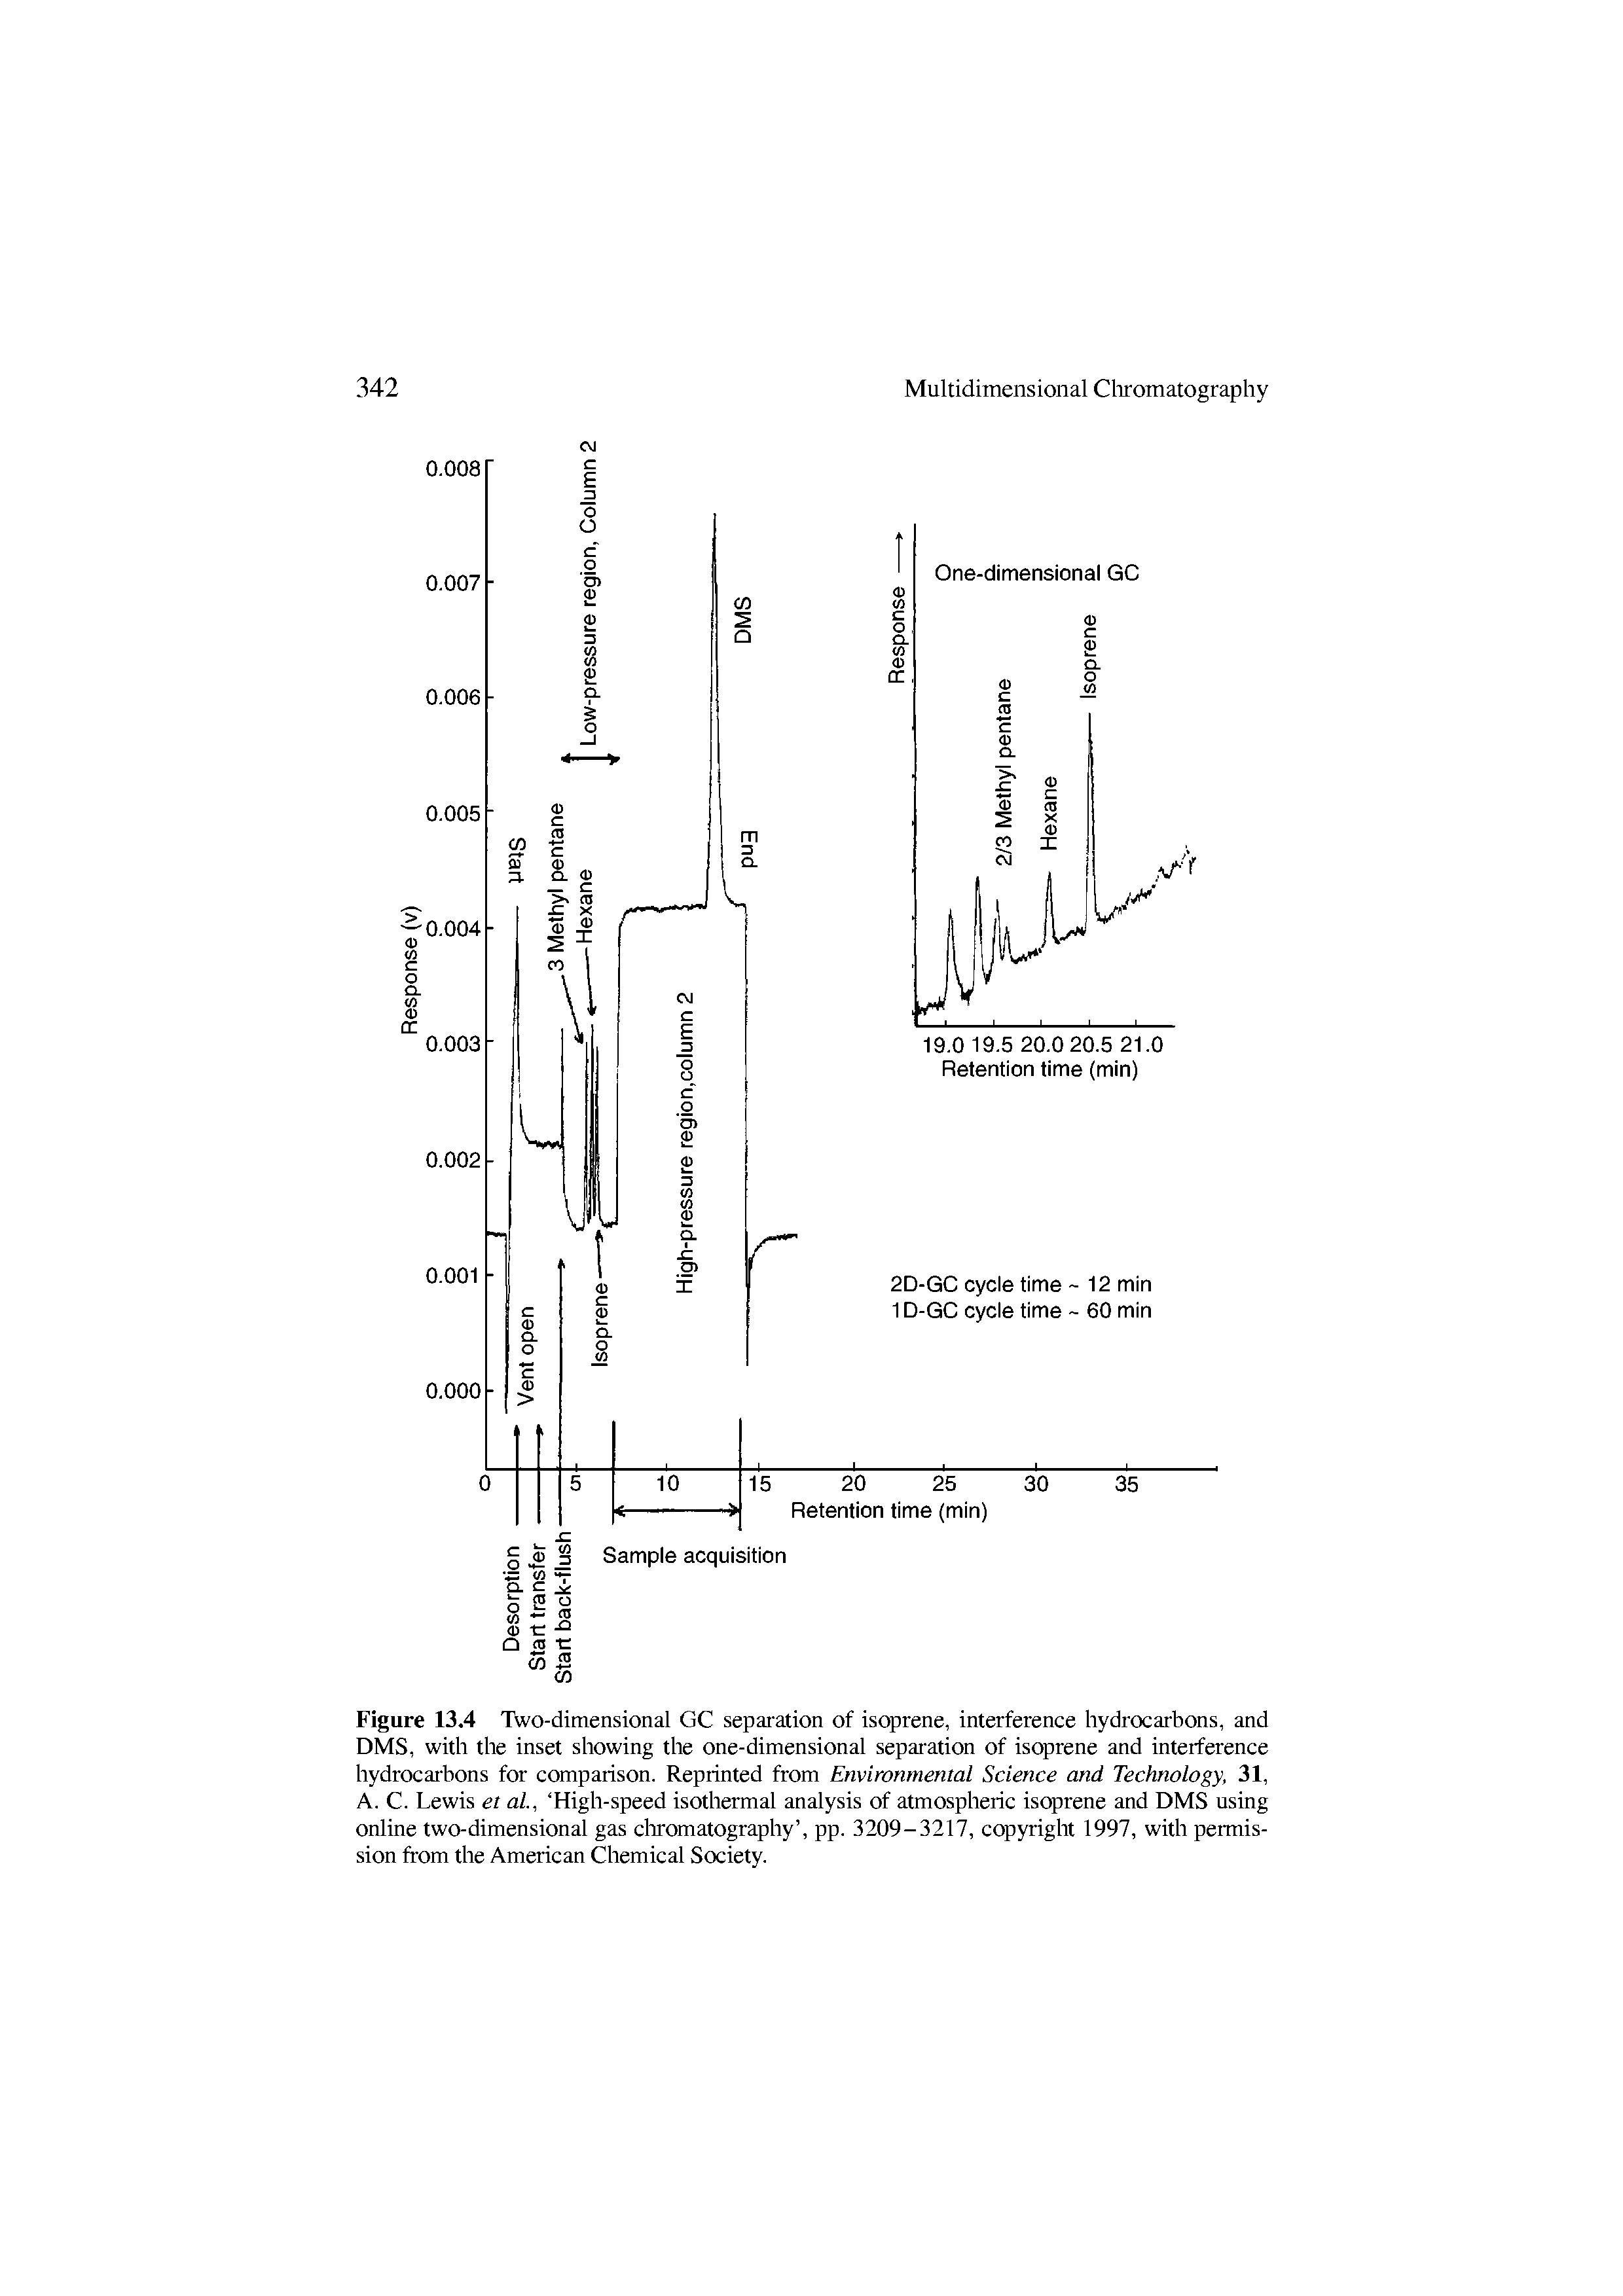 Figure 13.4 Two-dimensional GC separation of isoprene, interference hydrocarbons, and DMS, with the inset showing the one-dimensional separation of isoprene and interference hydrocarbons for comparison. Reprinted from Environmental Science and Technology, 31, A. C. Lewis et ai, High-speed isothermal analysis of atmospheric isoprene and DMS using online two-dimensional gas cliromatography , pp. 3209-3217, copyright 1997, with permission from the American Chemical Society.